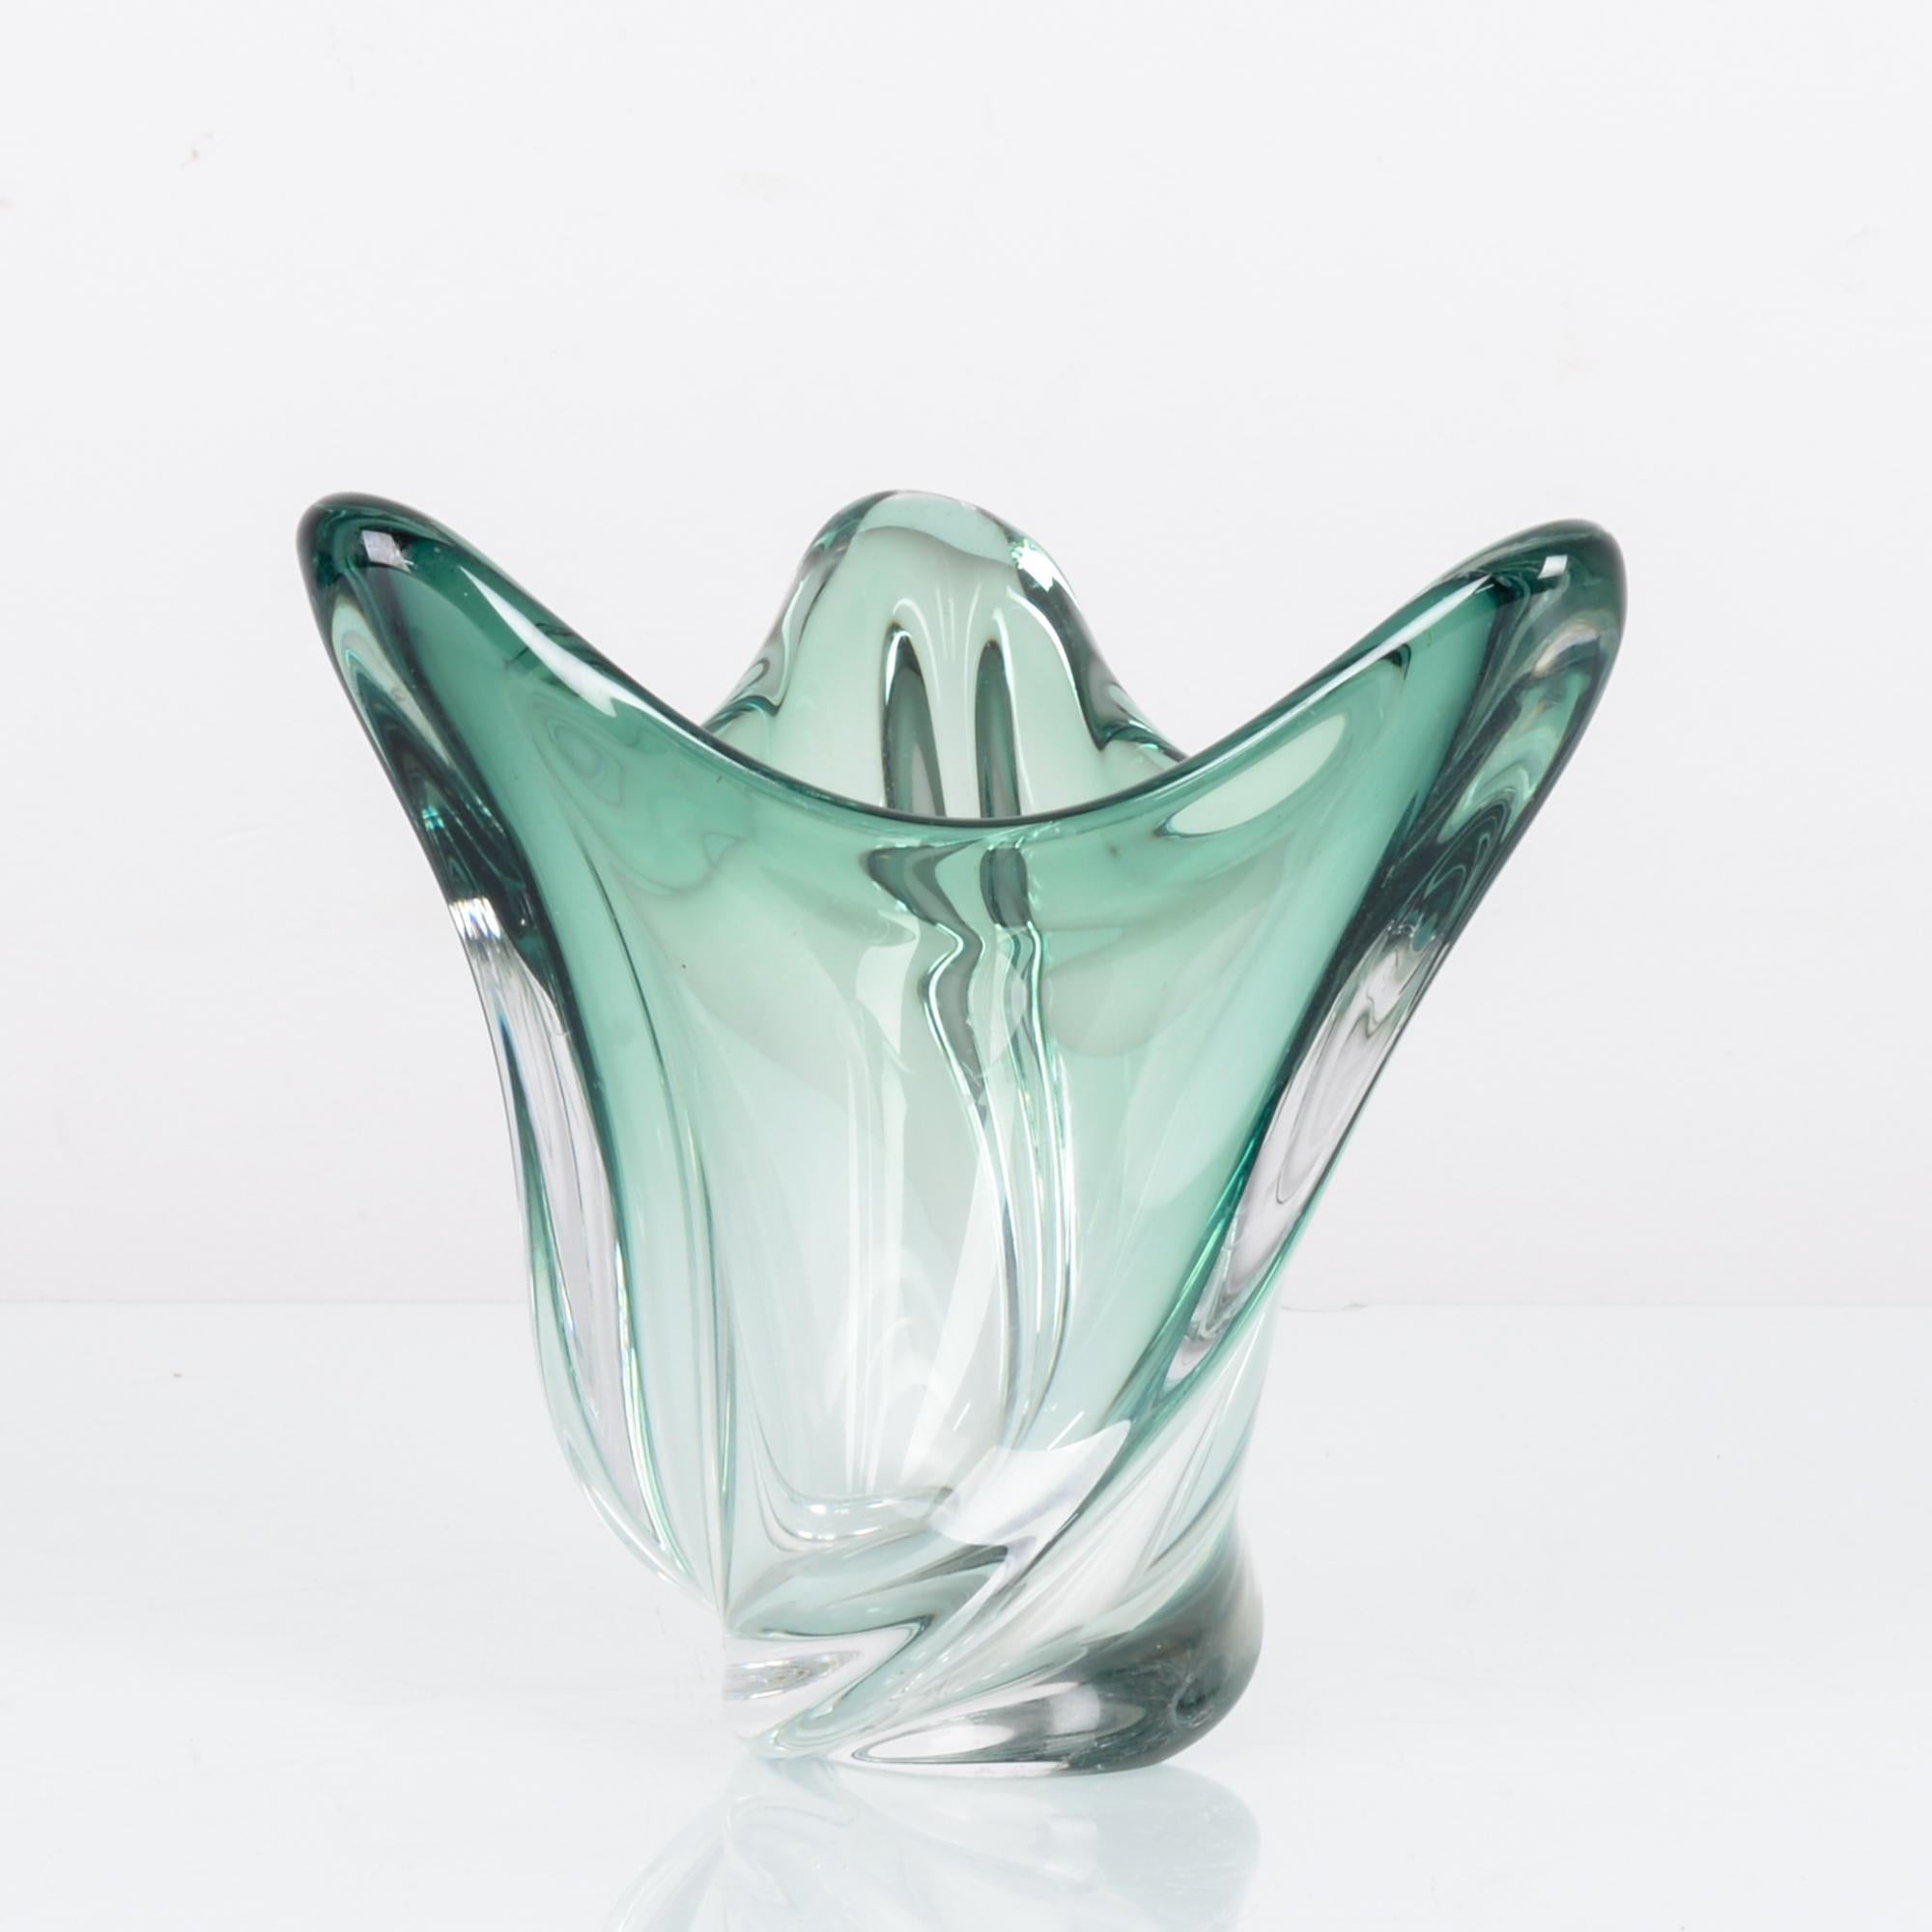 This glass bowl was made in Belgium, circa 1970. It resembles a flower with three petals, tinged myrtle green in the upper section. With its elegant form and lustrous quality, this glass decorative piece will bring refinement and style to your